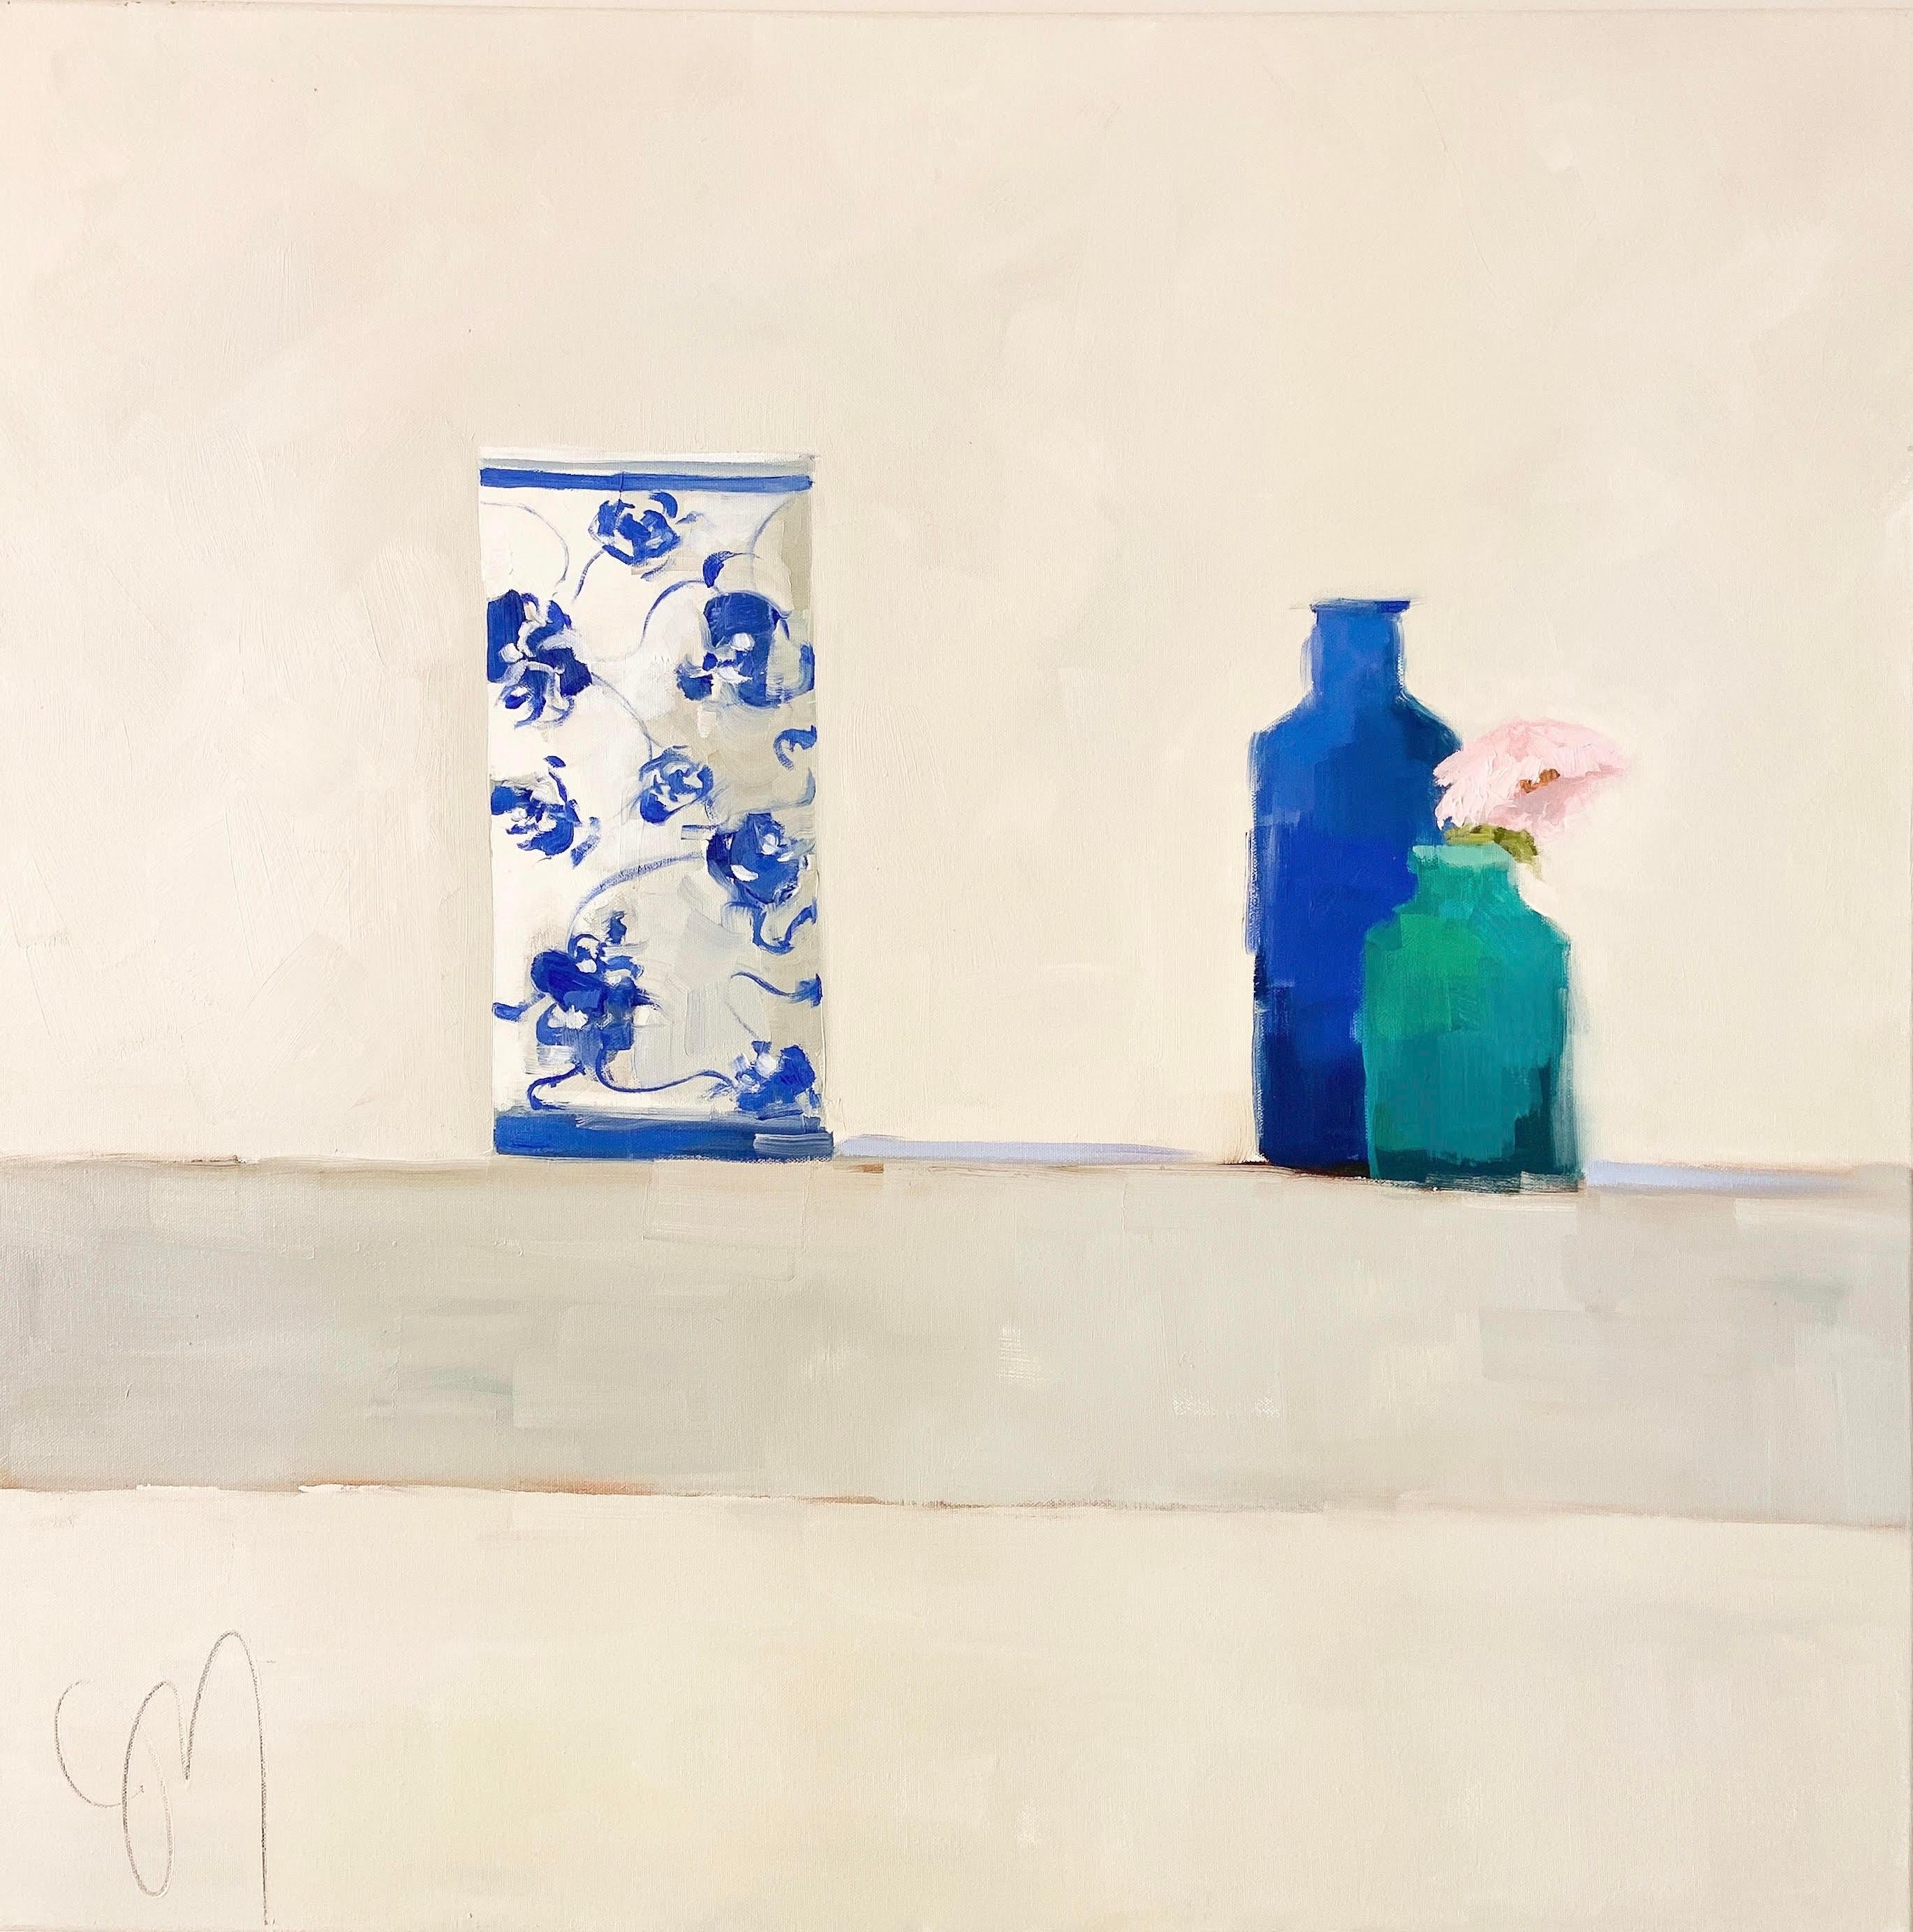 Jill Matthews Still-Life Painting - "Space Between" impressionist style painting of blue china vase next to a flower